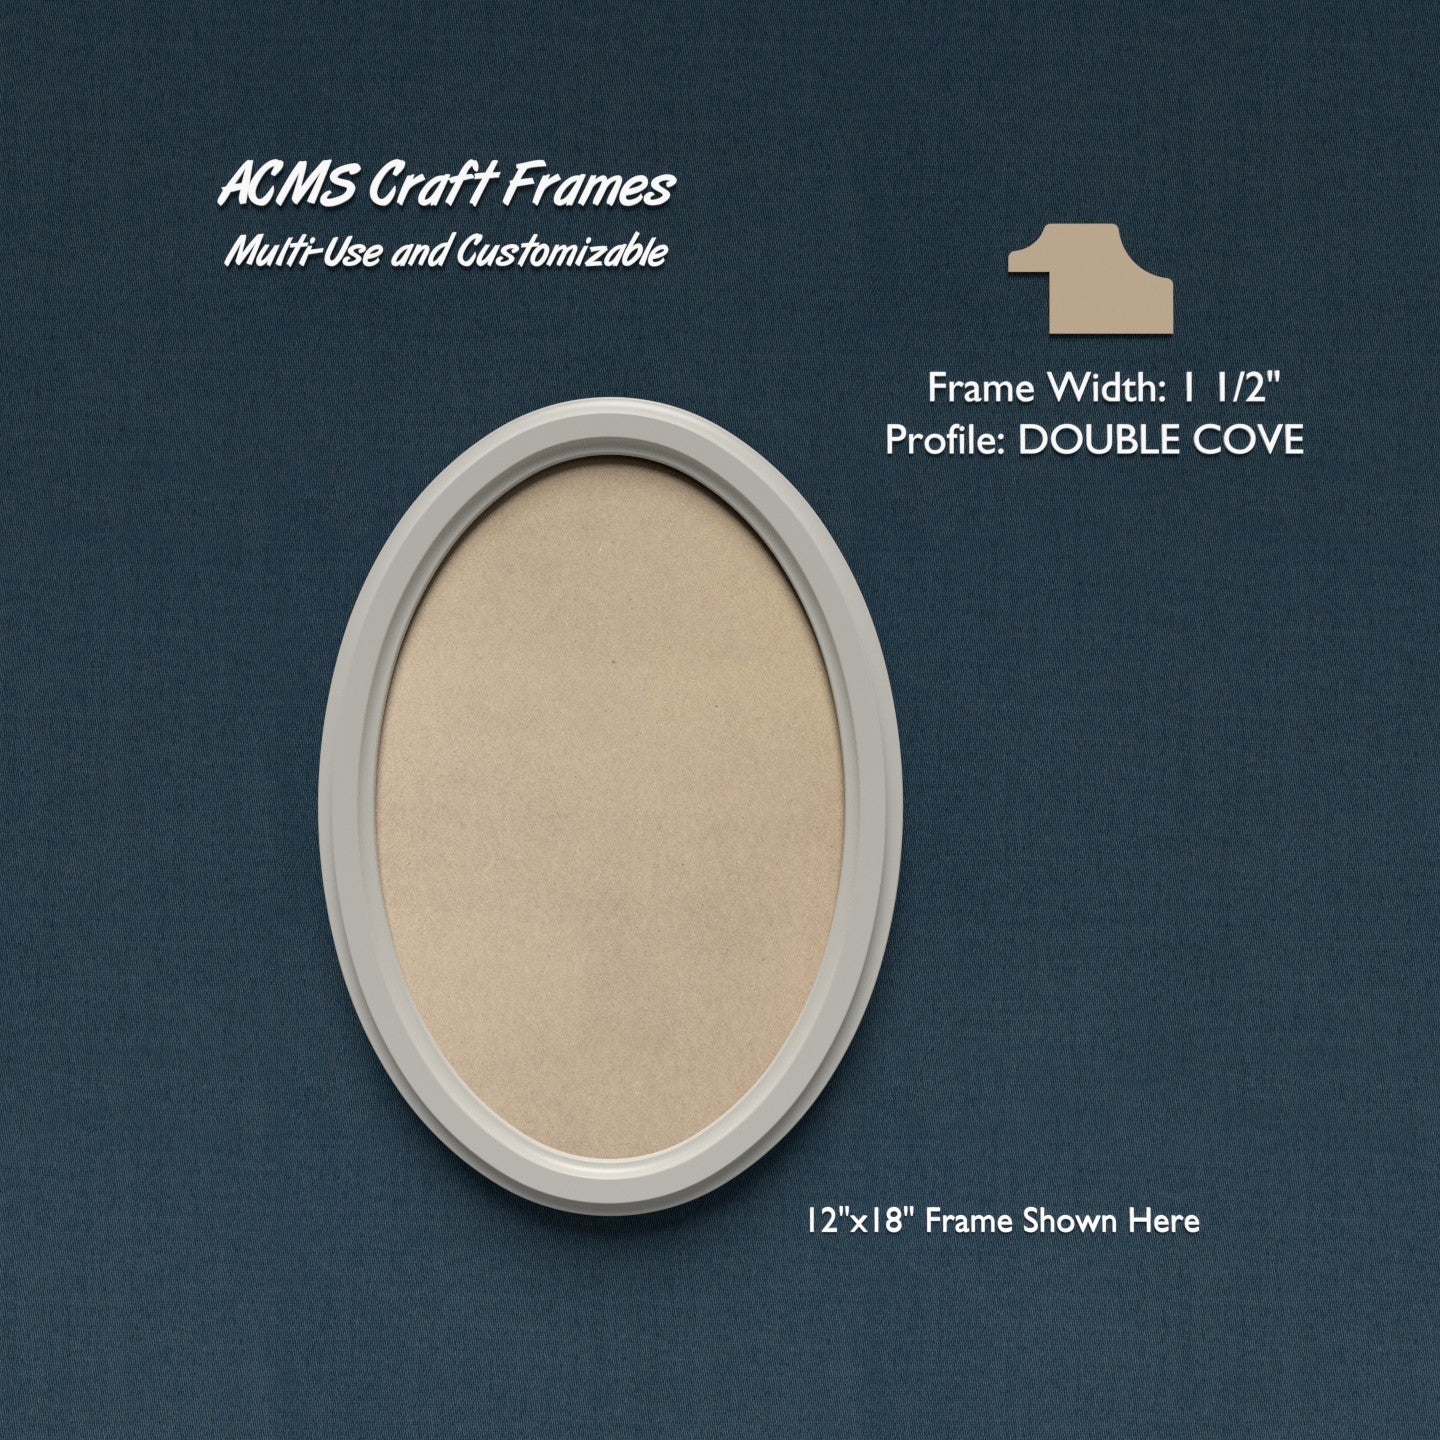 Oval Craft Frame - DOUBLE COVE Profile - 1 1/2" Frame Width - 1" Thick